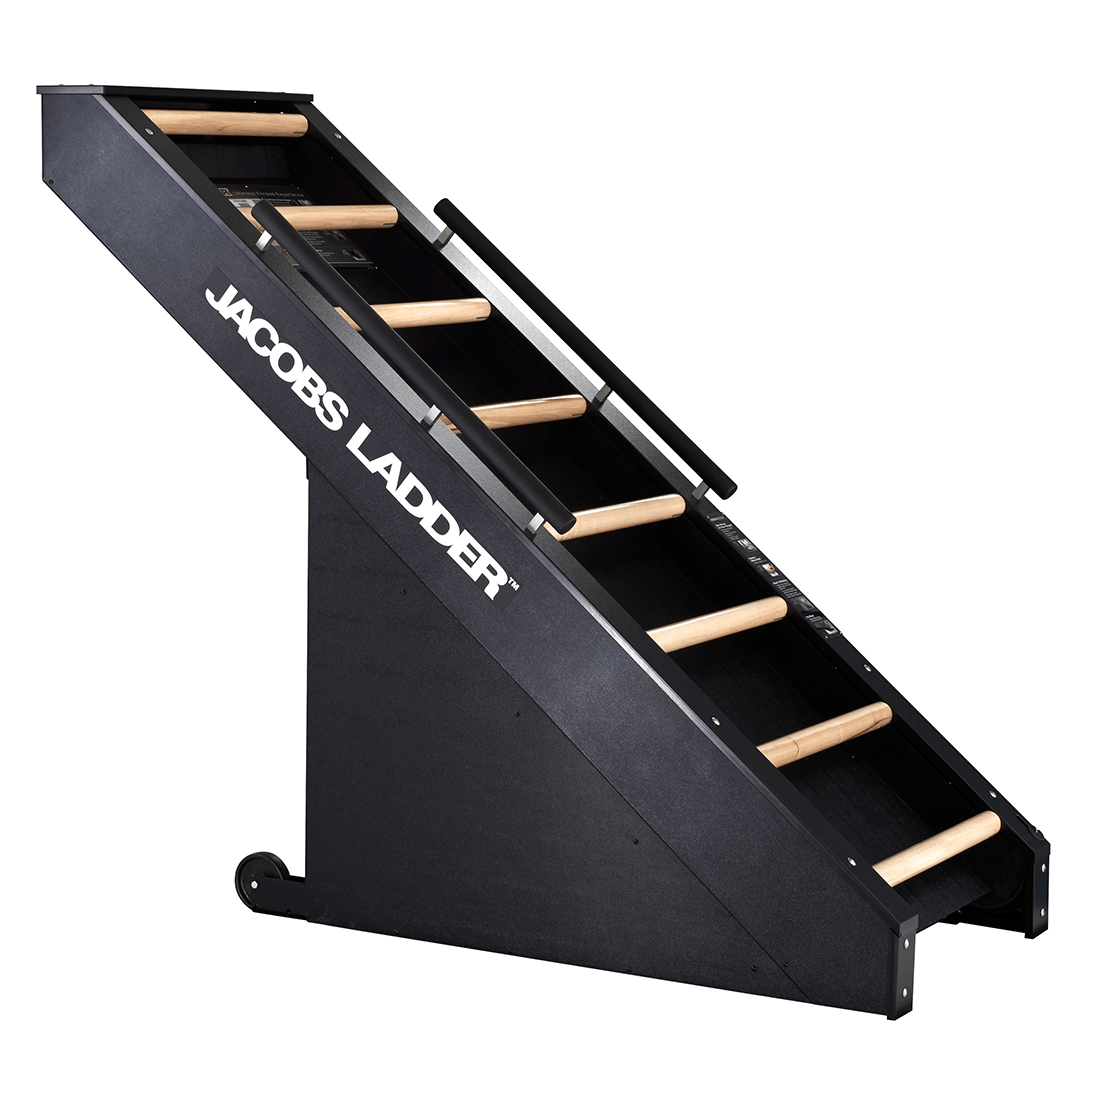 Jacobs Ladder The Most Effective